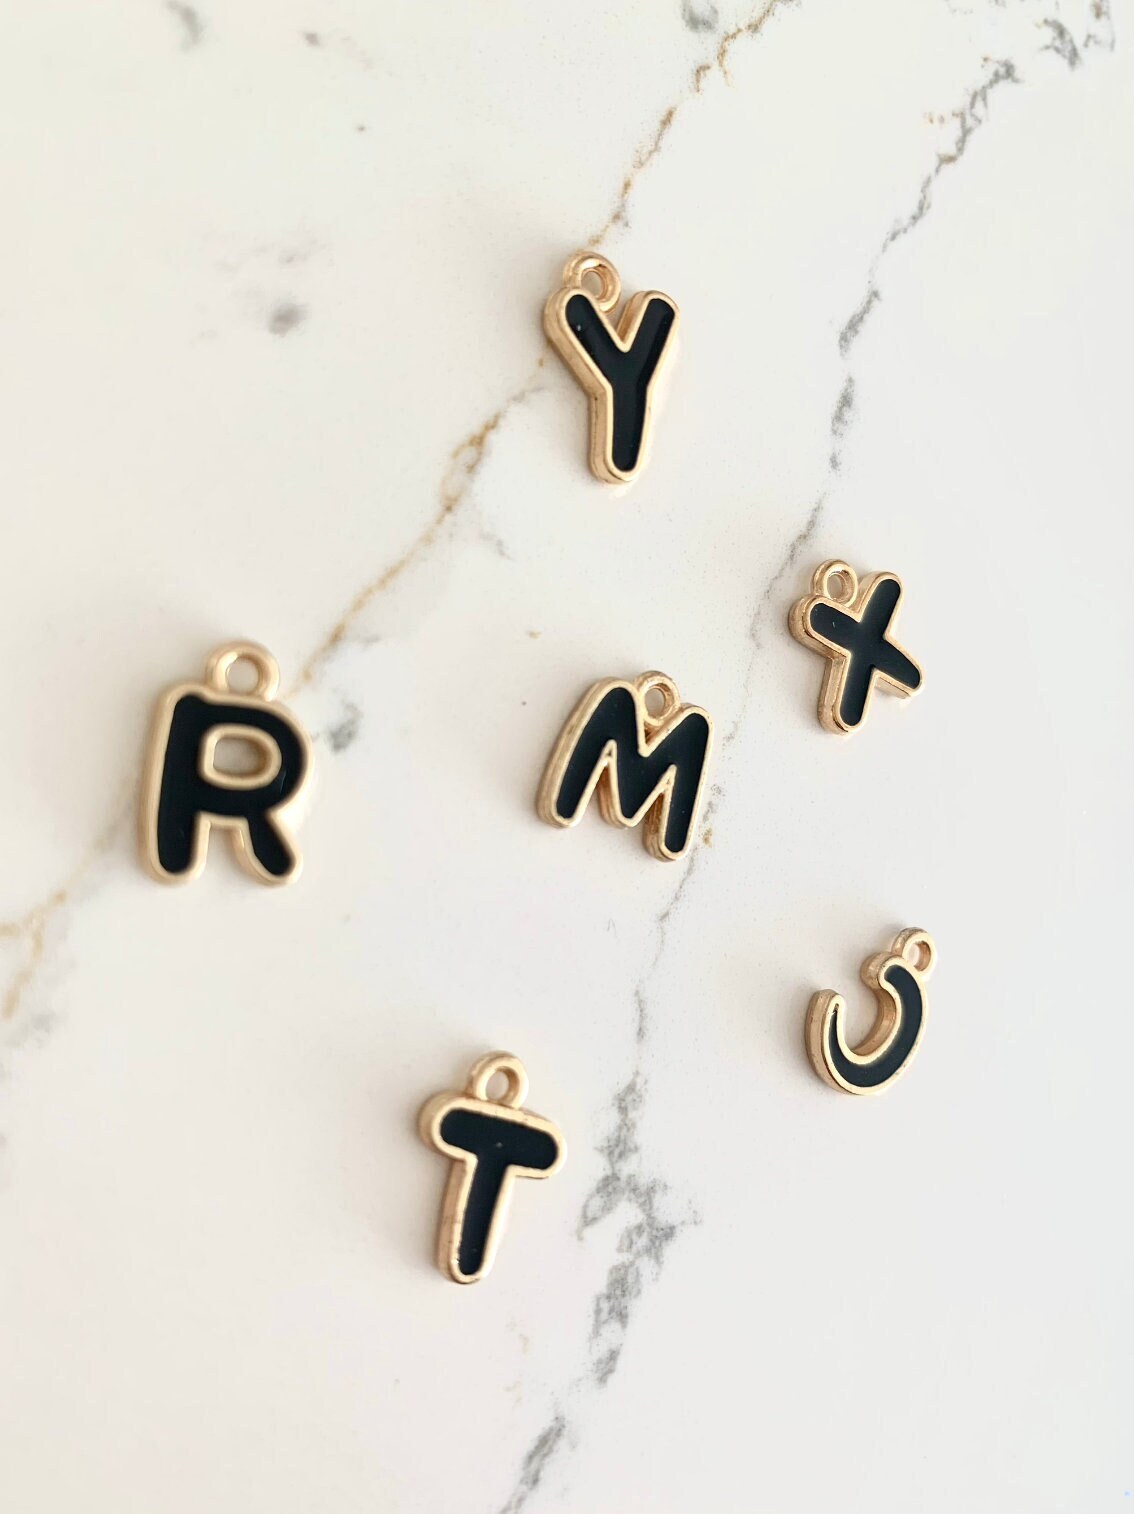 Letter Charms, Alphabet Charms, Initial Charms White Round DIY